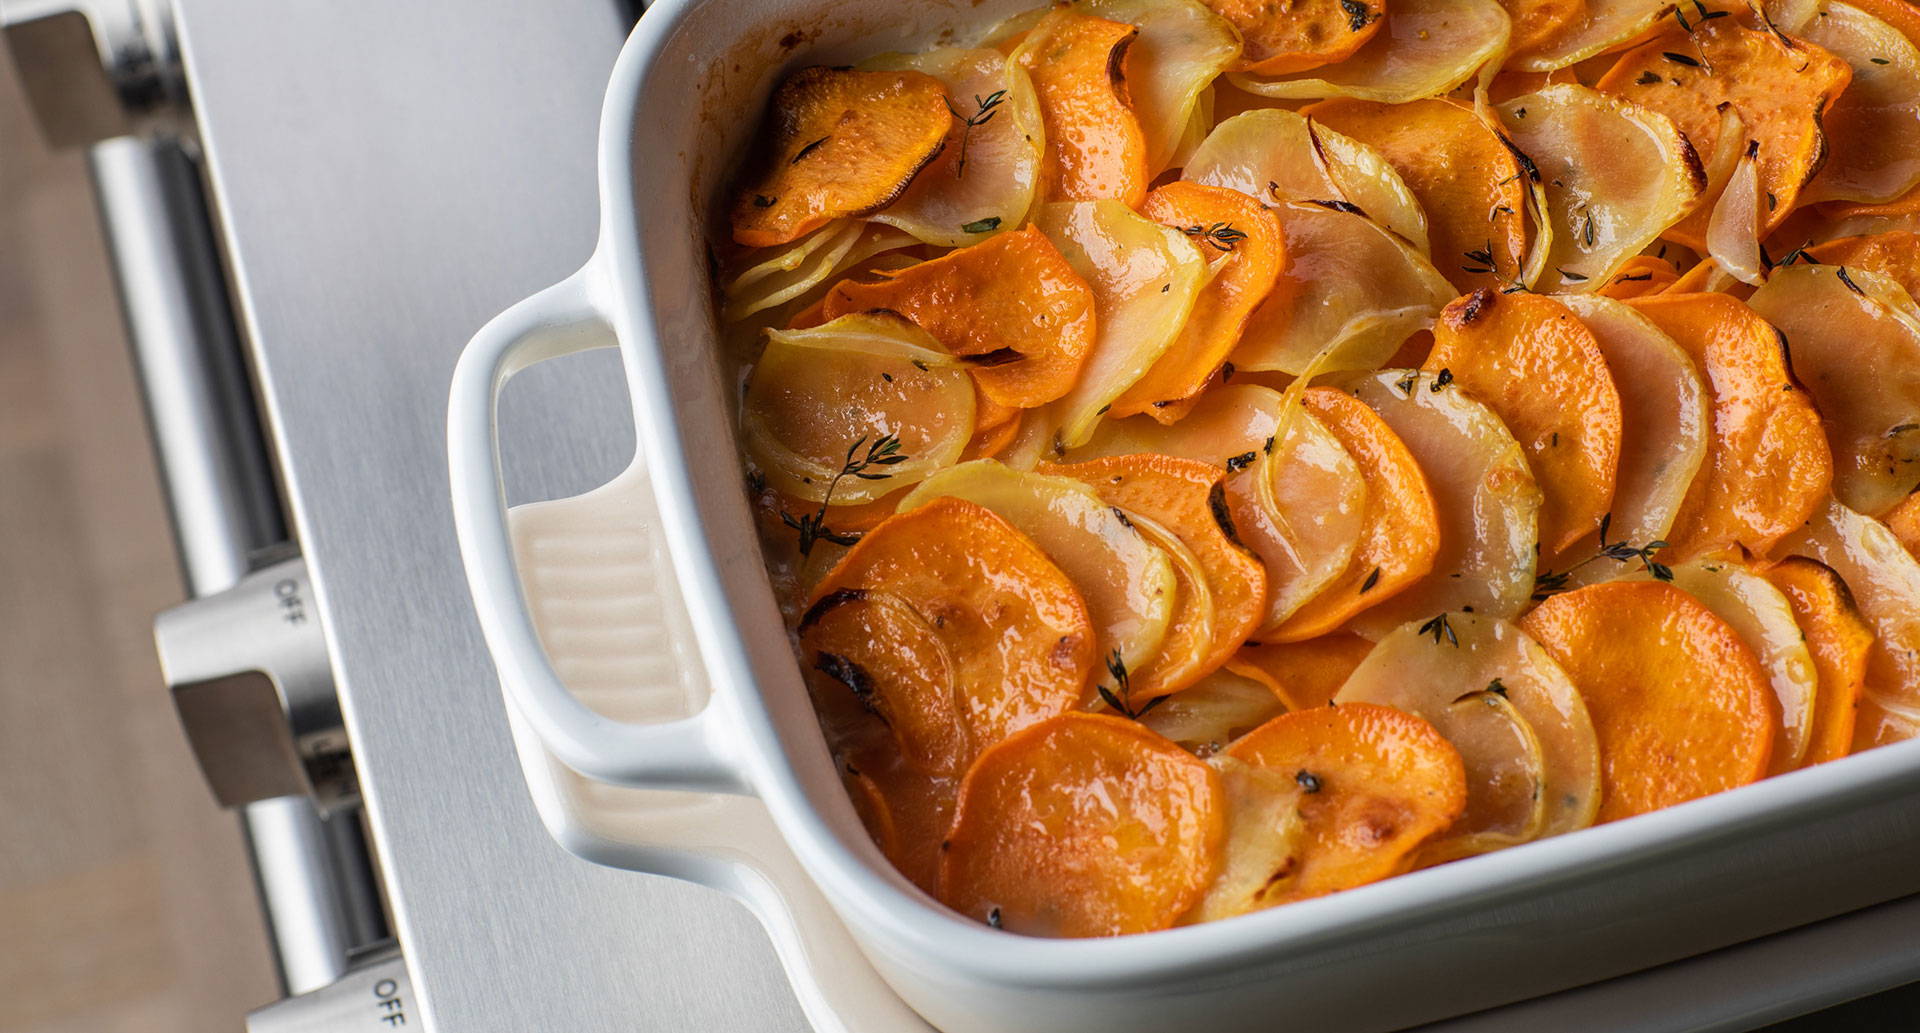 Sliced sweet potatoes and Yukon gold potatoes in a casserole dish